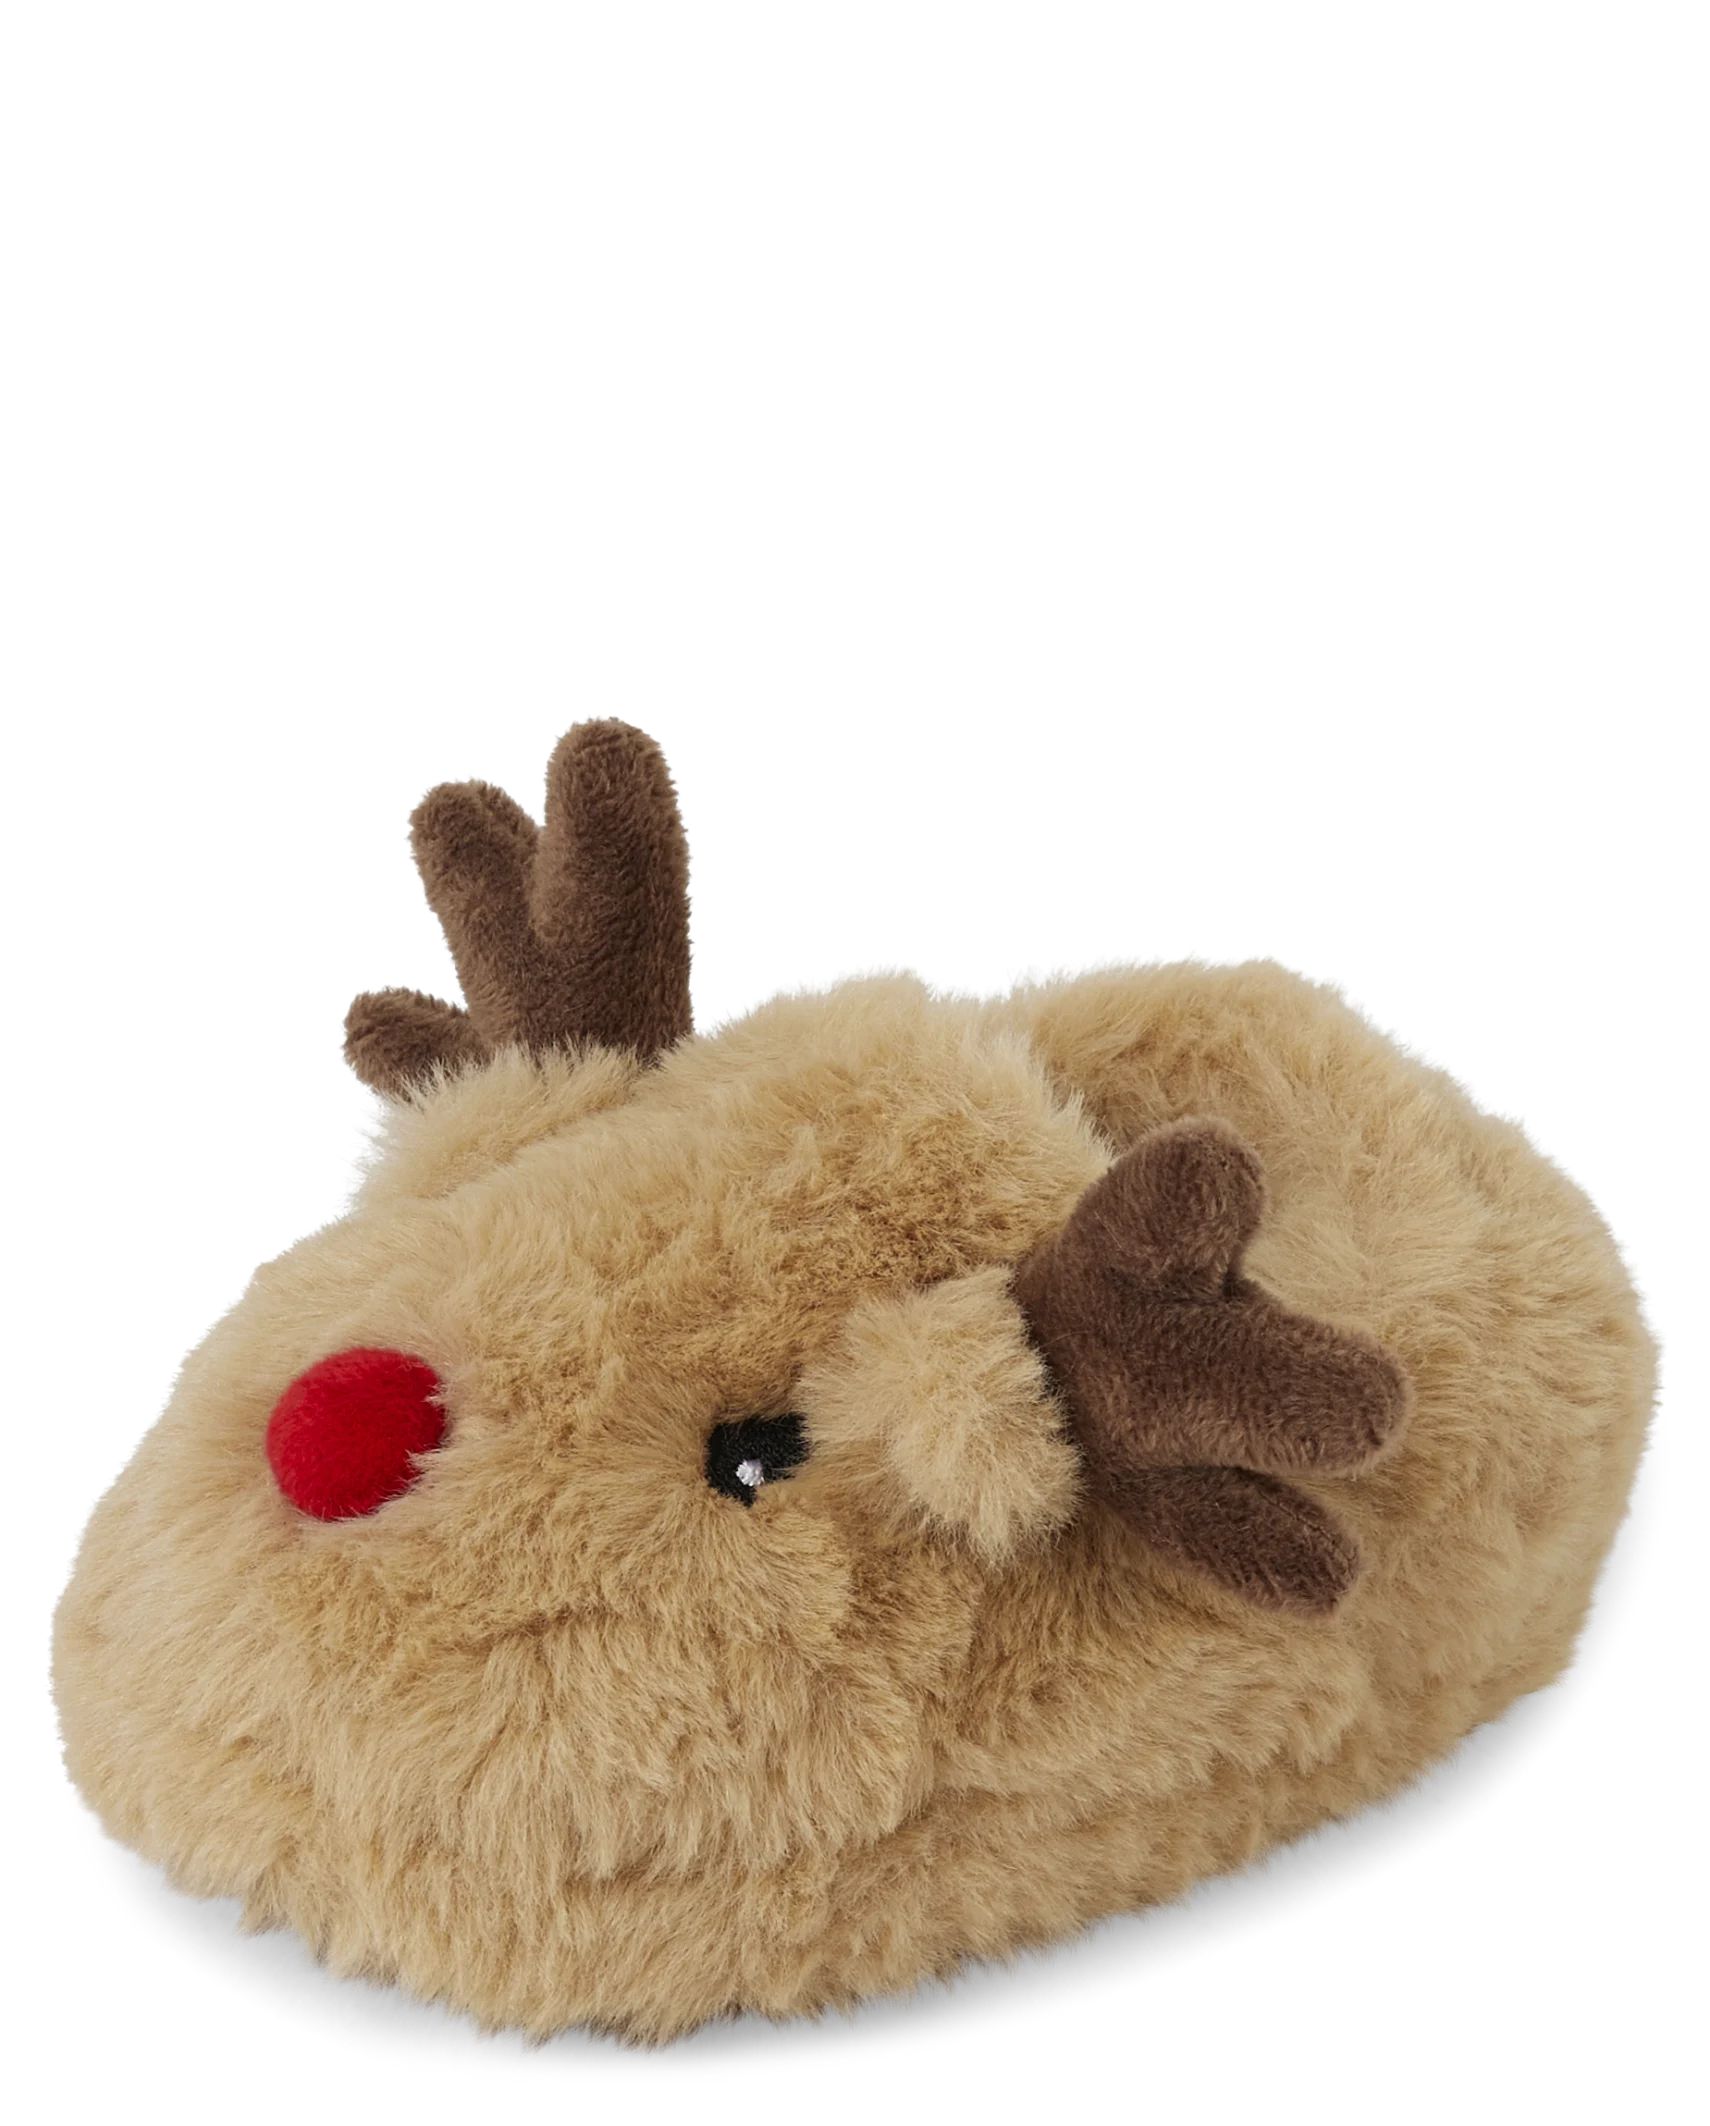 Unisex Toddler Matching Family Christmas Reindeer Slippers | The Children's Place  - BROWN | The Children's Place